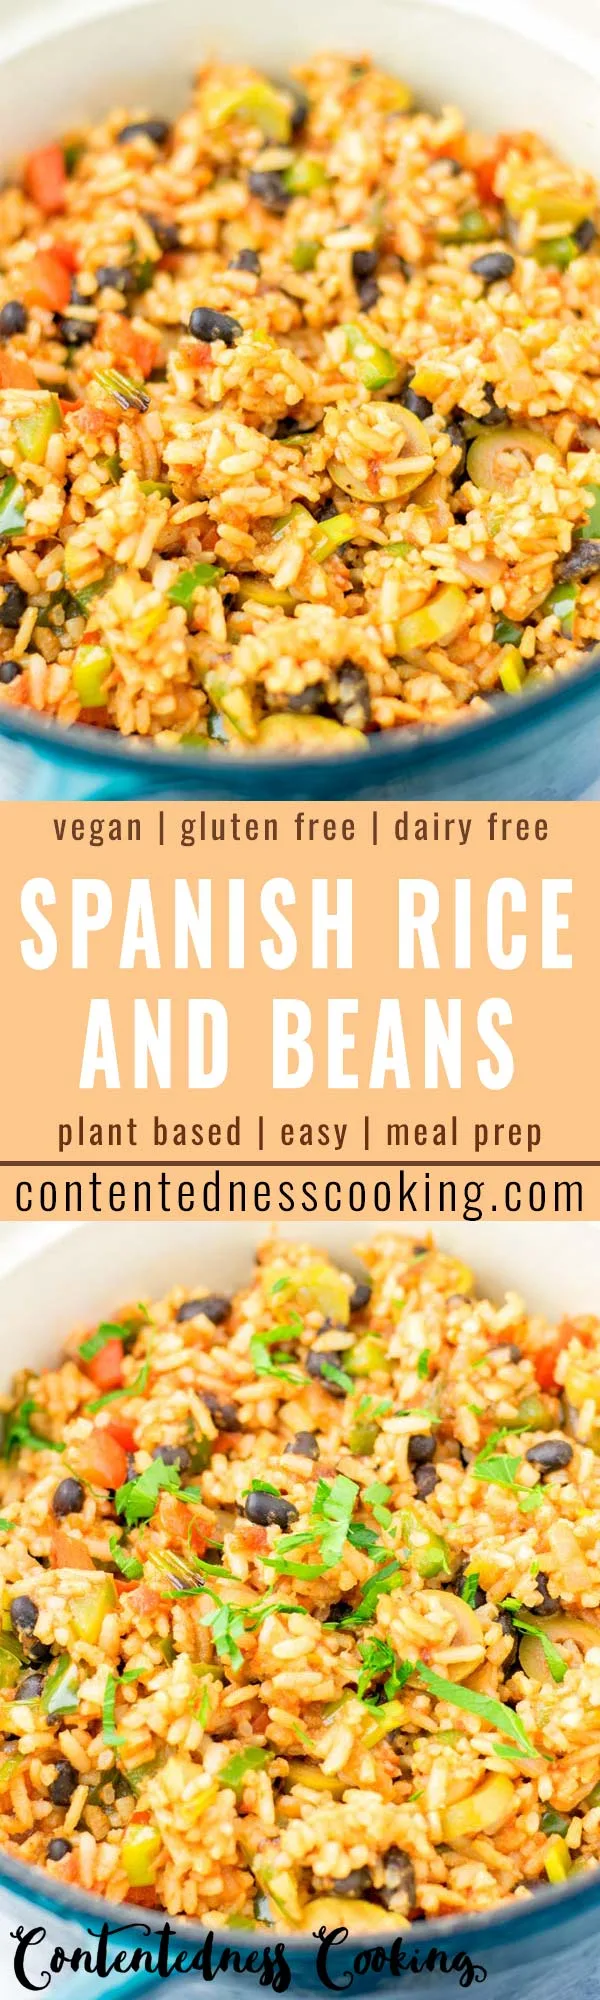 This Spanish Rice and Beans is made with authentic spices and is super easy to make in one pot. Ready in under 25 minutes and seriously so delicious. Amazing for dinner, lunch, meal prep and more. Also you will find an instant pot version. #vegan #dairyfree #glutenfree #vegetarian #onepotmeal #spanishriceinstantpot #dinner #lunch #mealprep #budgetmeals #contentednesscooking #comfortfood #familymeals #spanishriceandbeans 